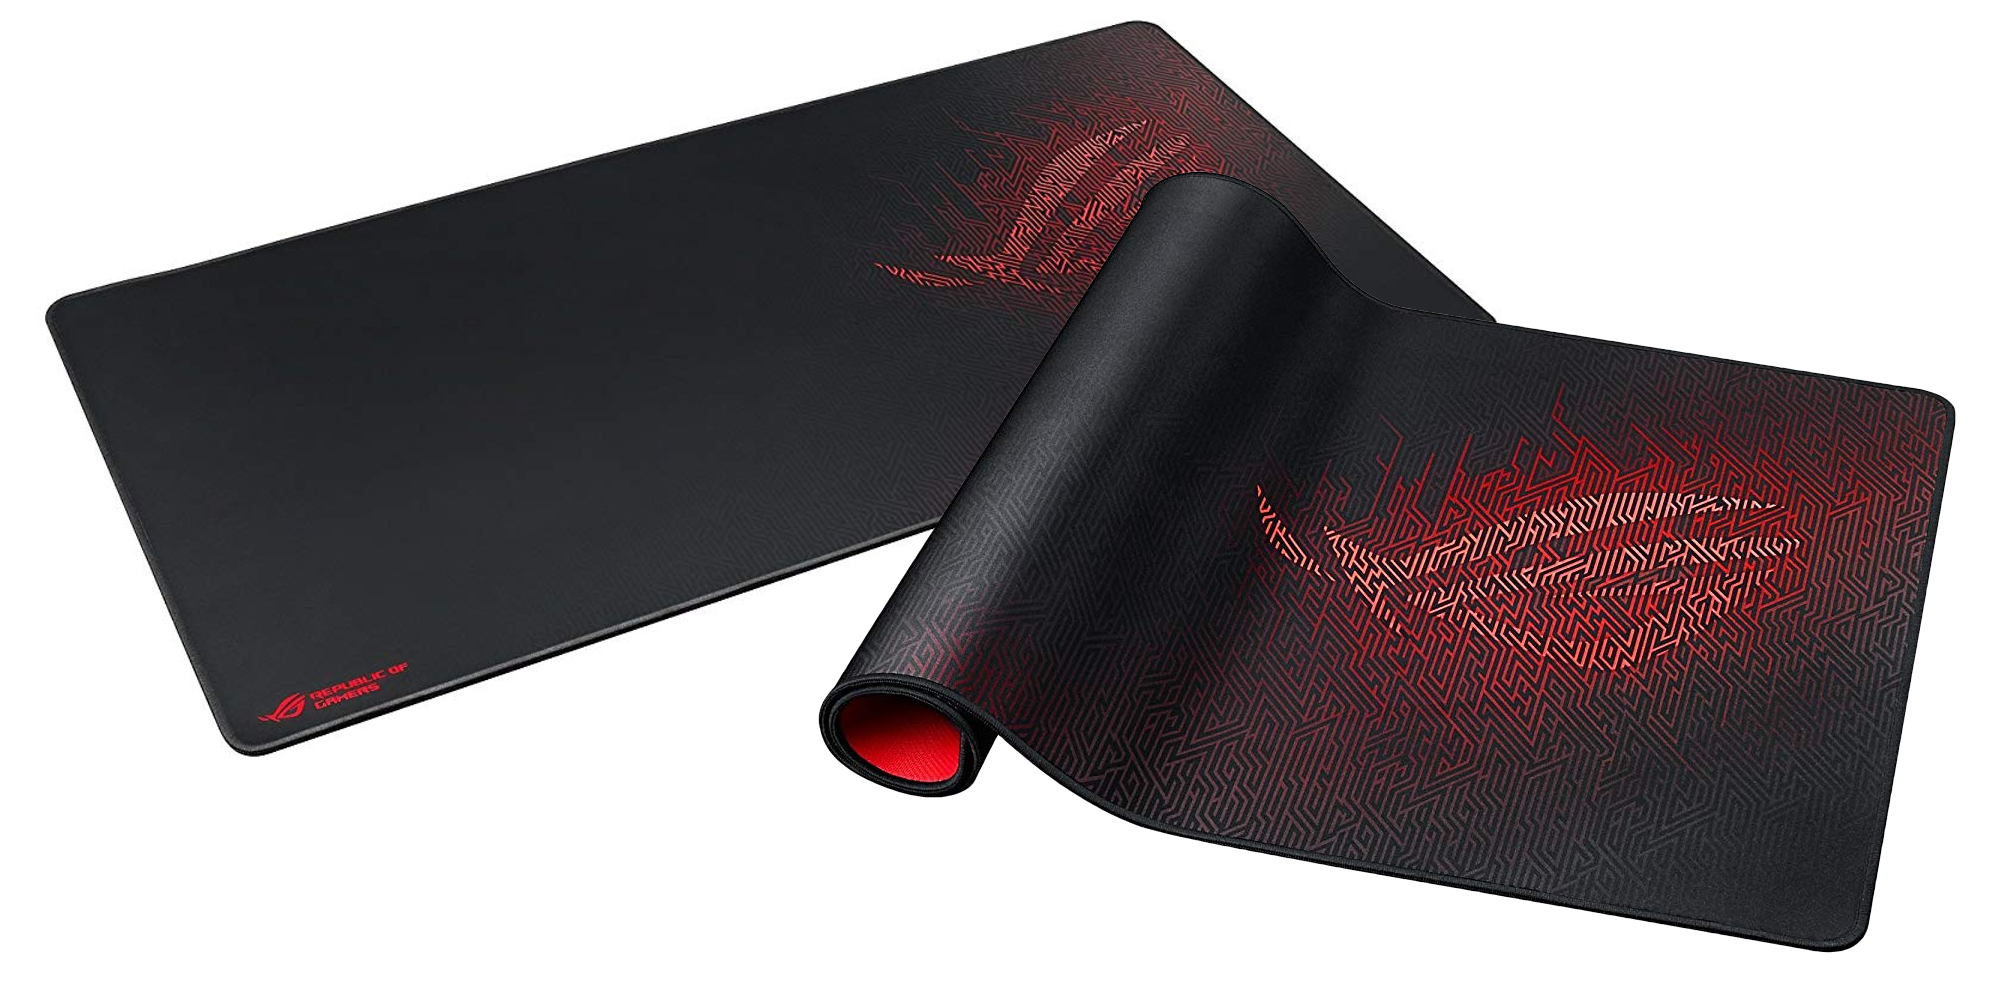 Add The Asus Rog Sheath Gaming Mouse Pad To Your Battlestation For 26 30 Off All Time Low 9to5toys